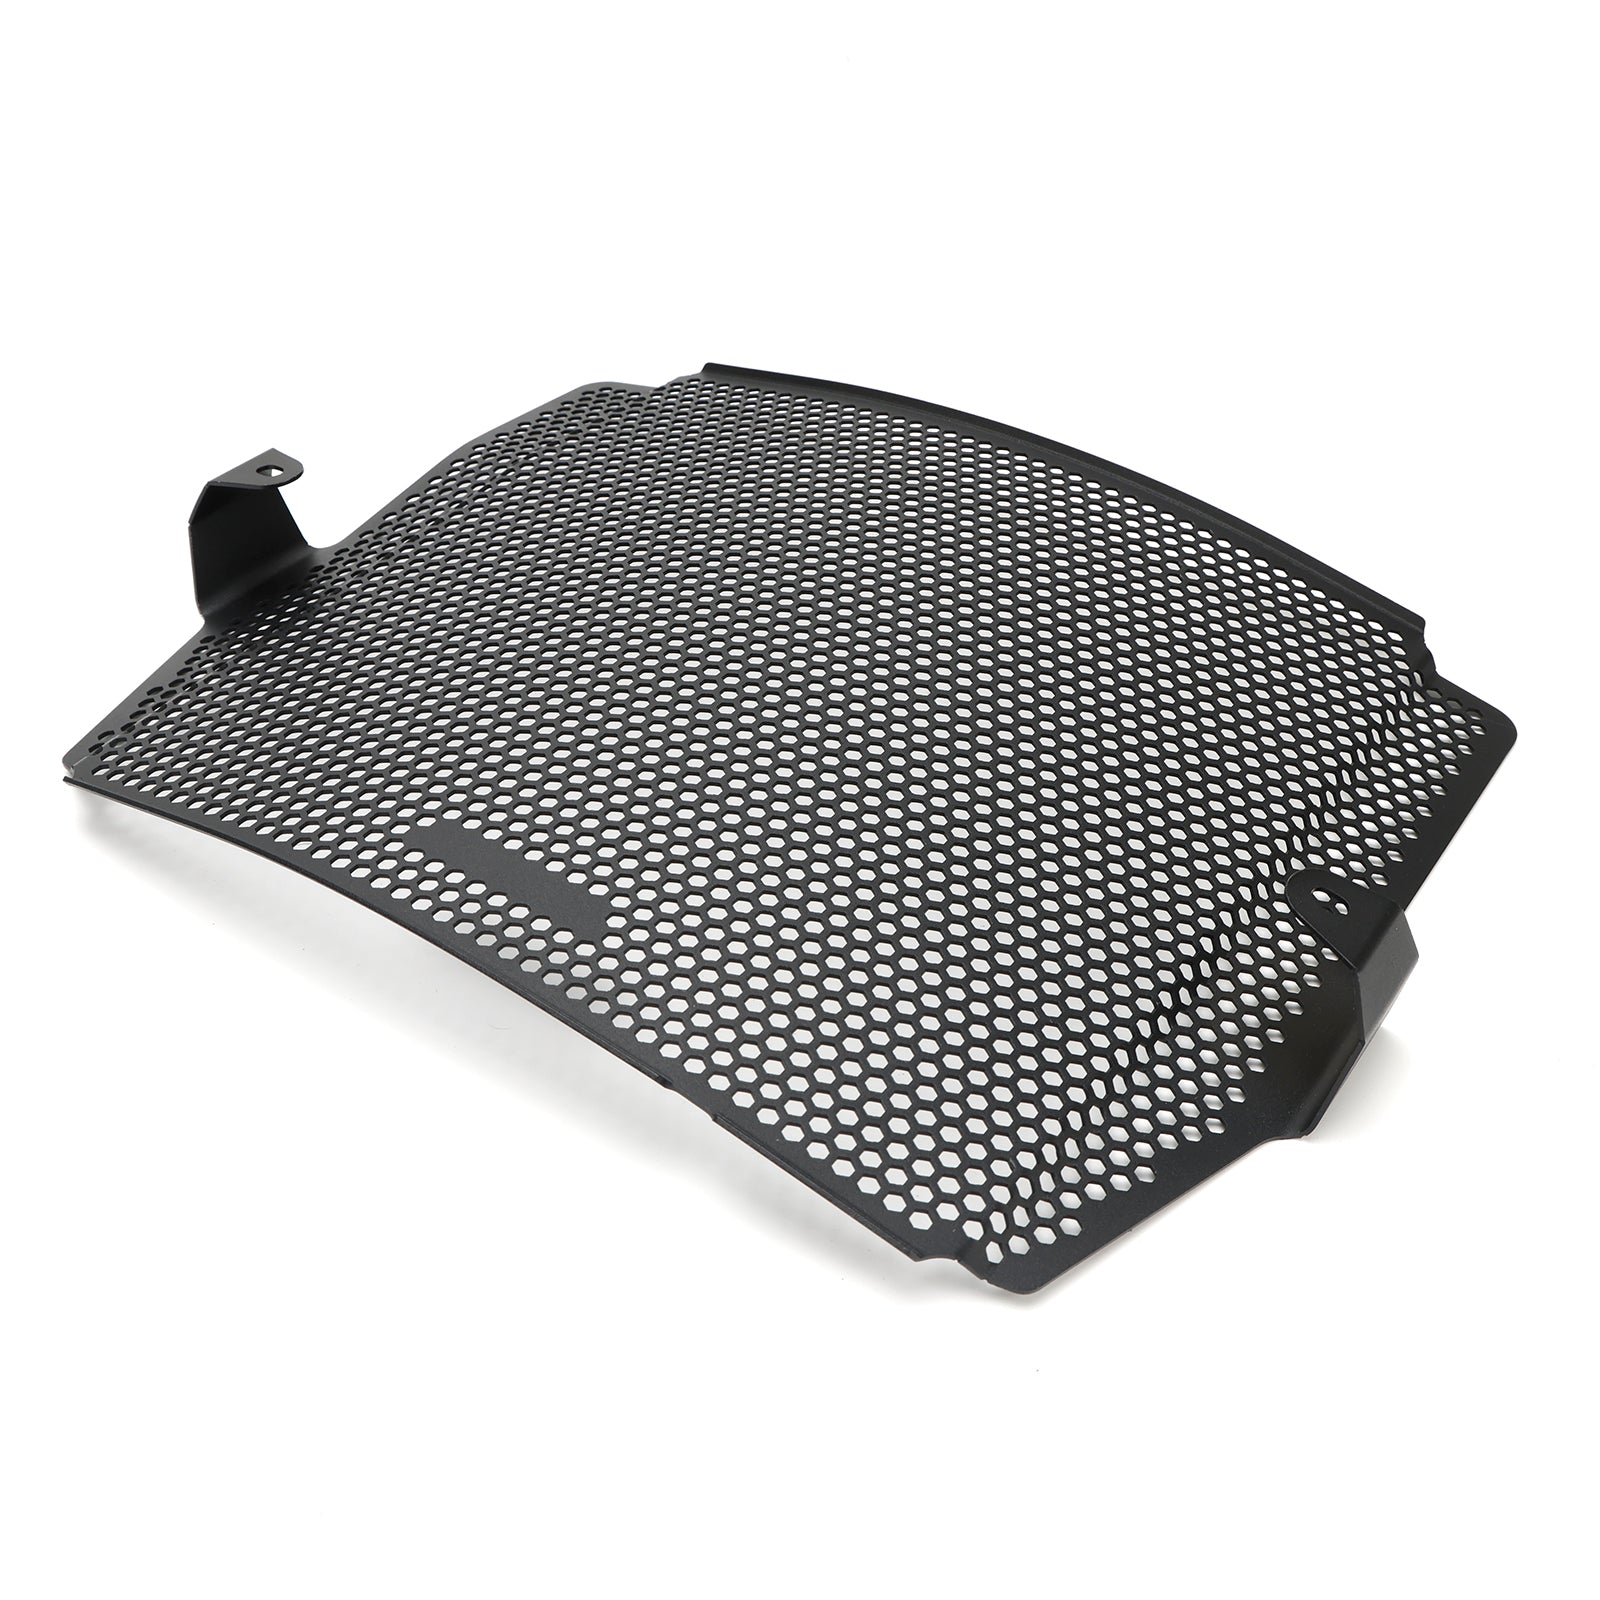 Radiator Guard Cover Radiator Protector For Triumph Street Triple 765 Rs 2023